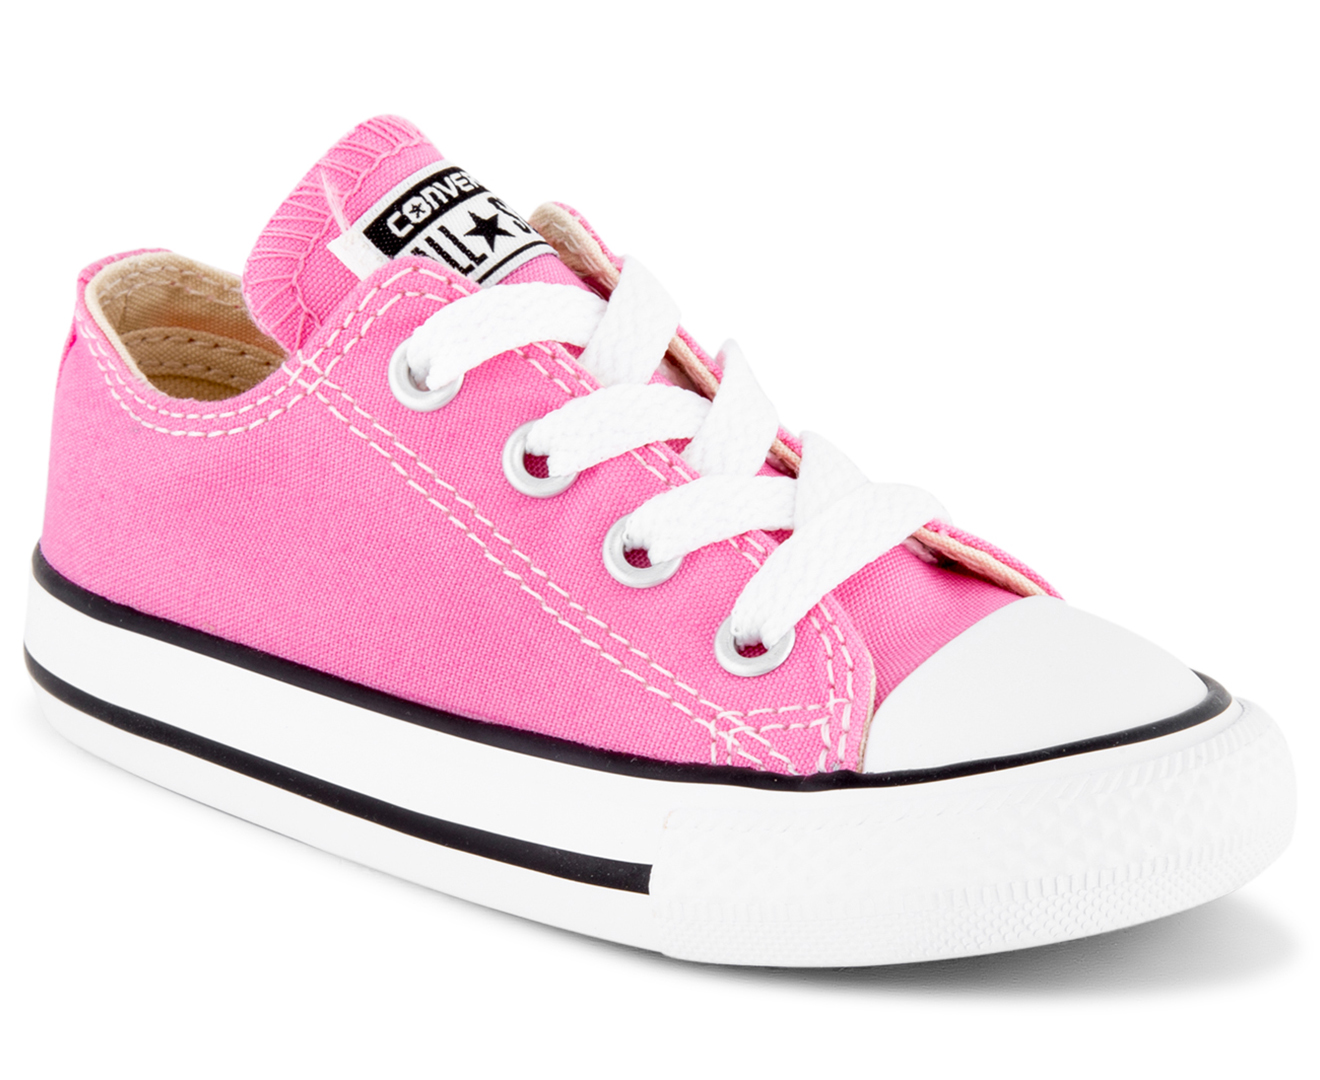 Converse Toddler Chuck Taylor All Star Low Top Sneakers - Pink | Catch ...